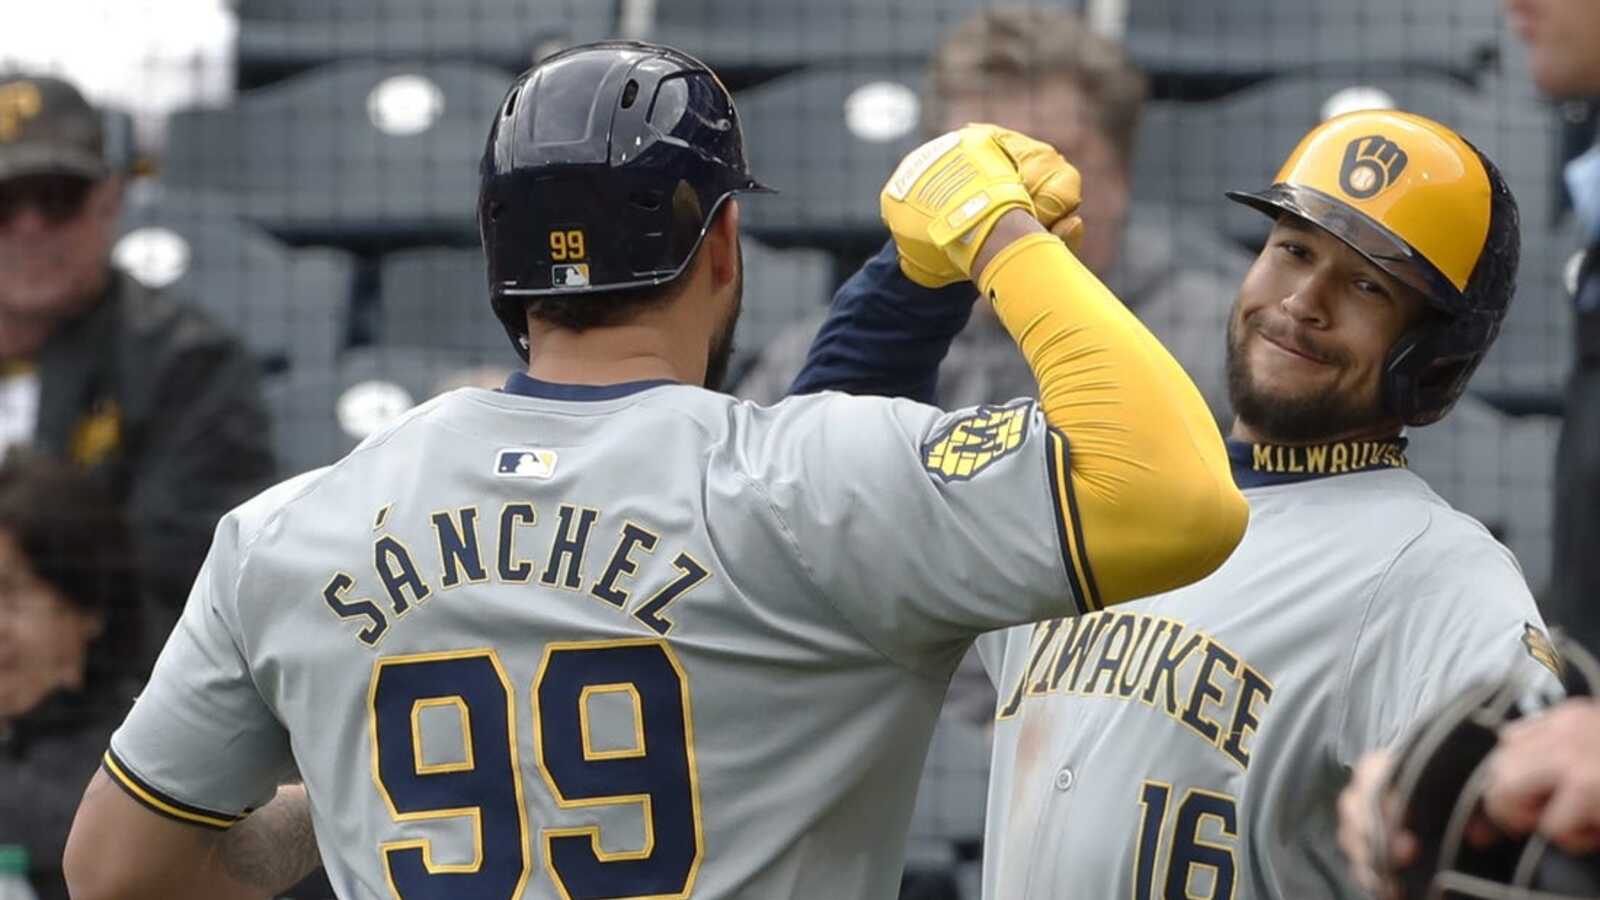 Brewers, after surge on the road, return home to face Yankees